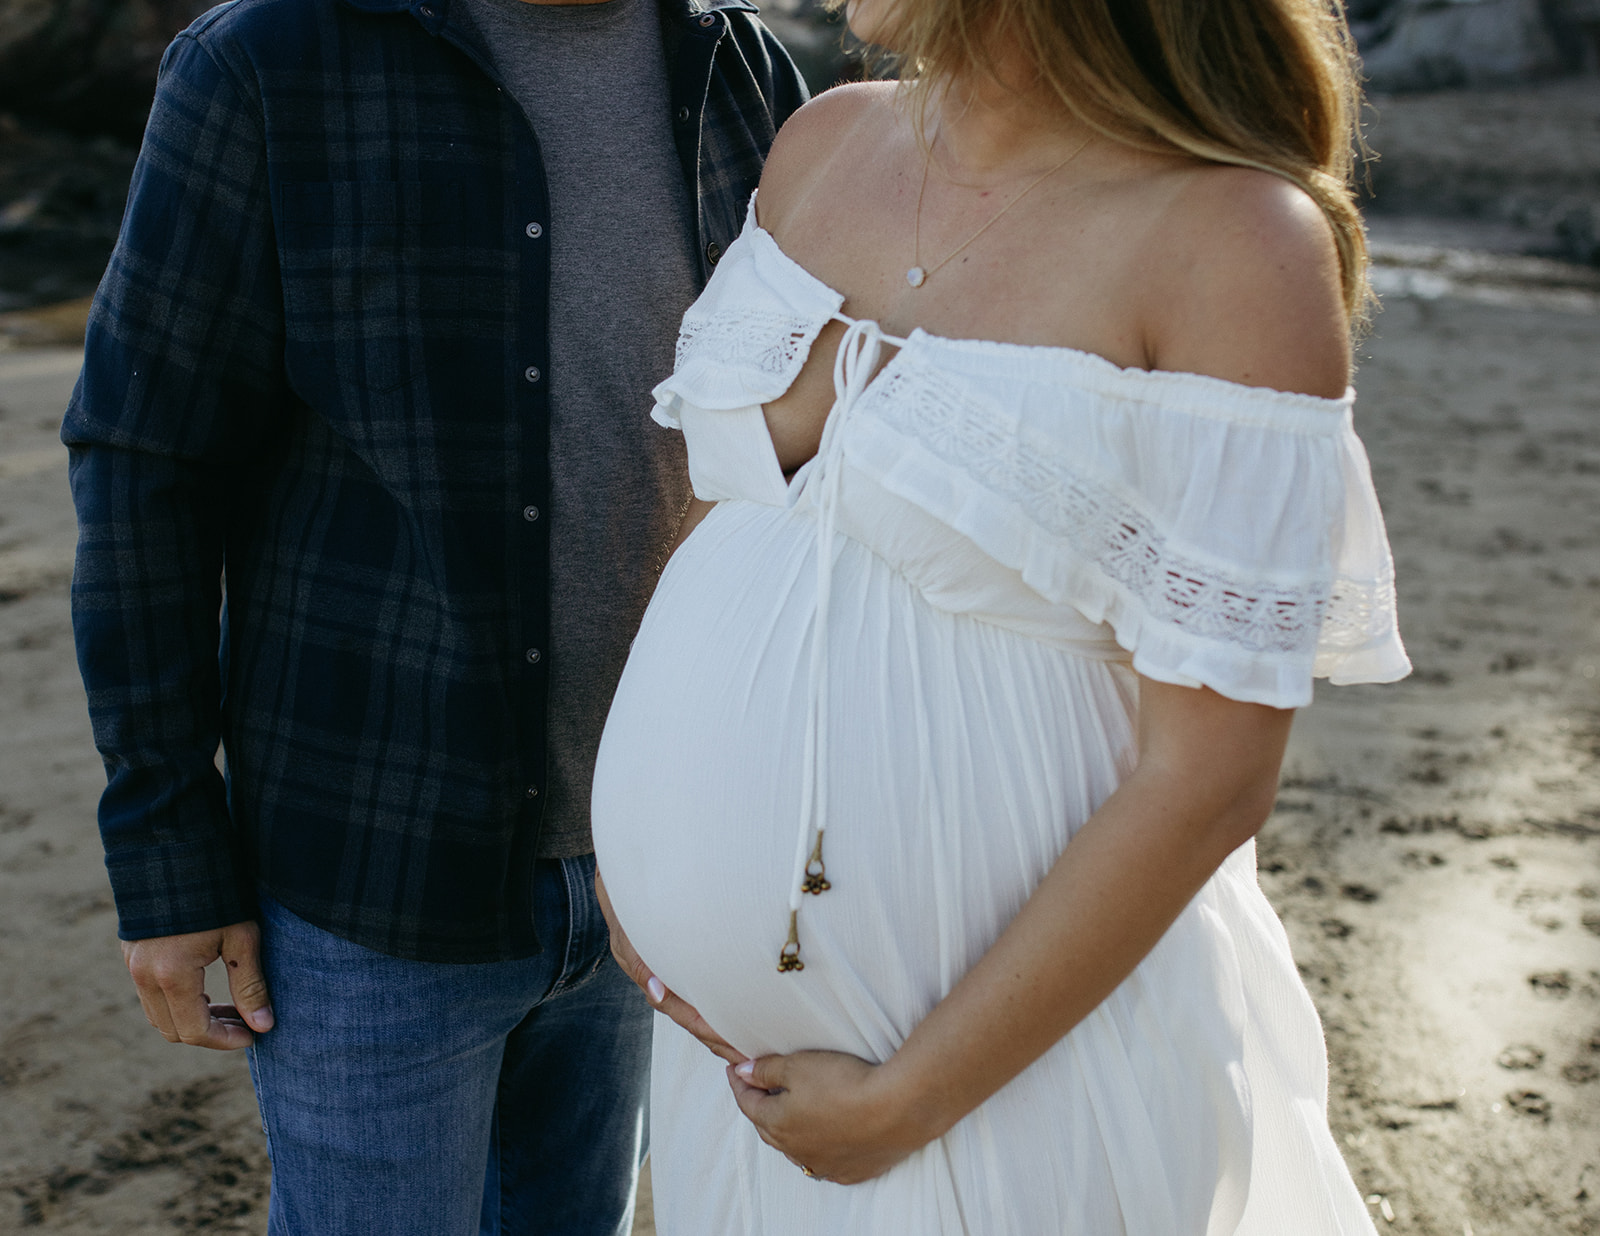 Couple pose for maternity photos at beach in Bay Area